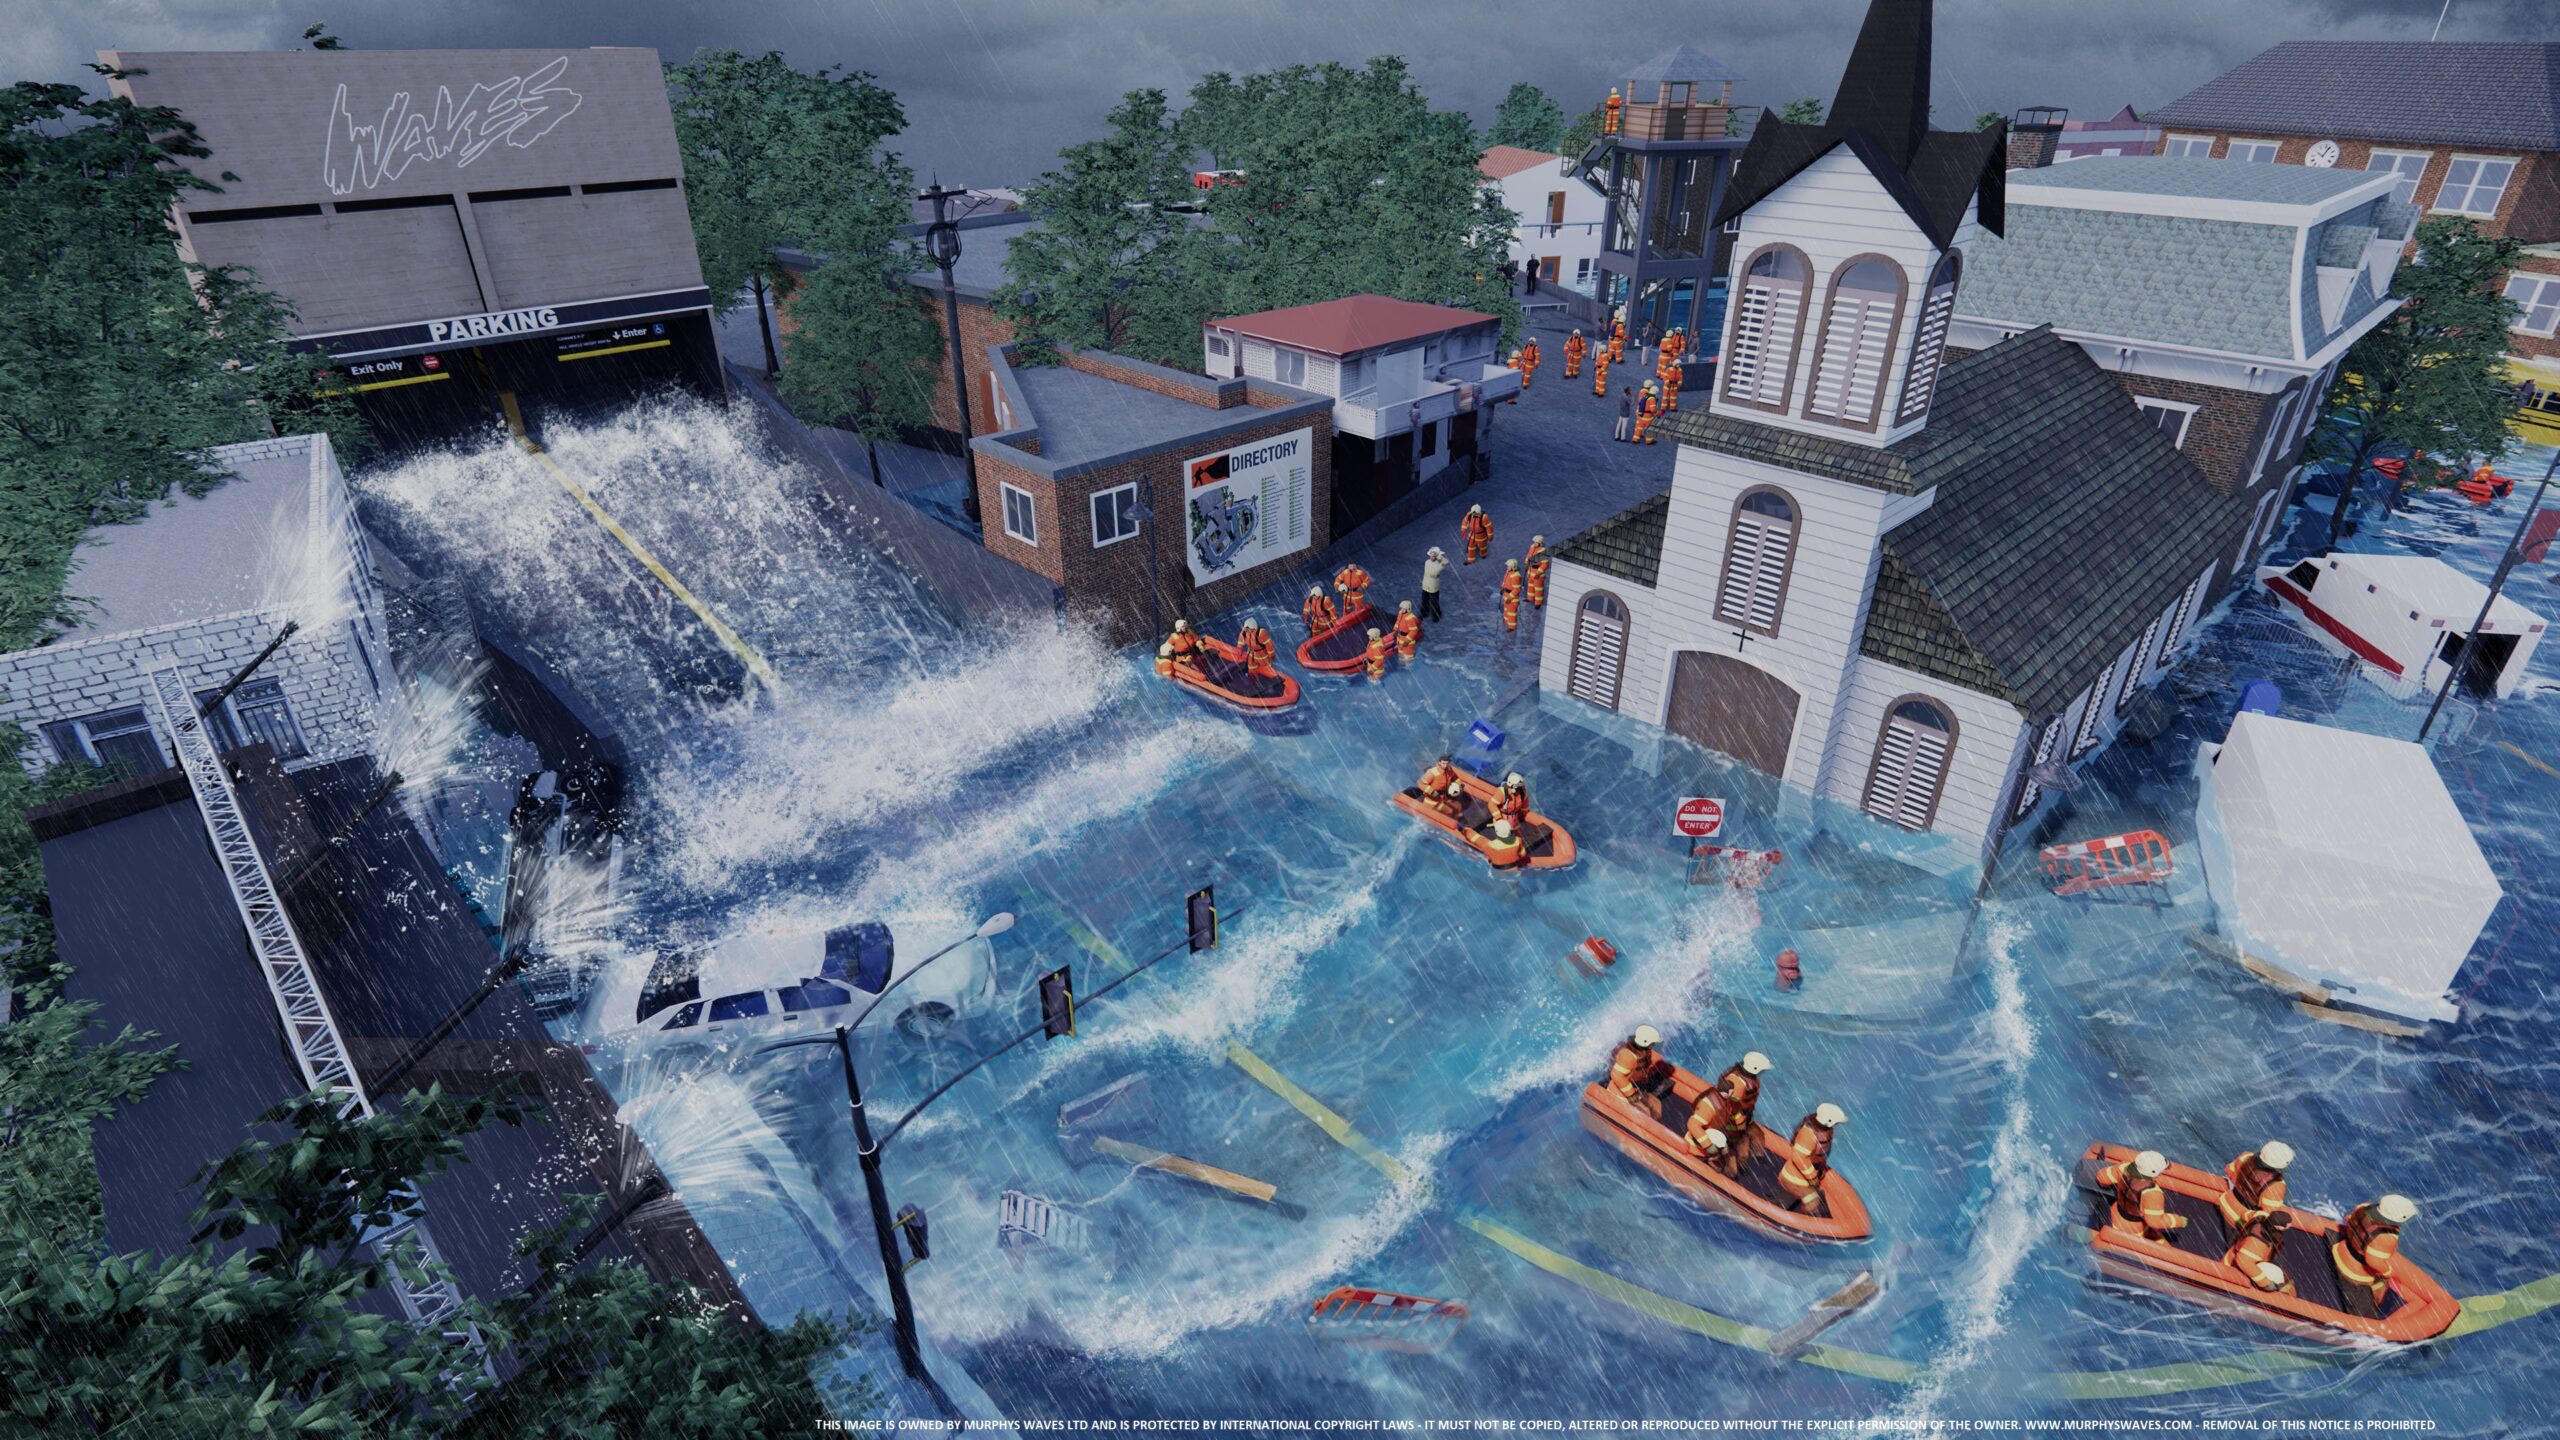 2-Murphys Disaster Flood - Search & Rescue Training Centre